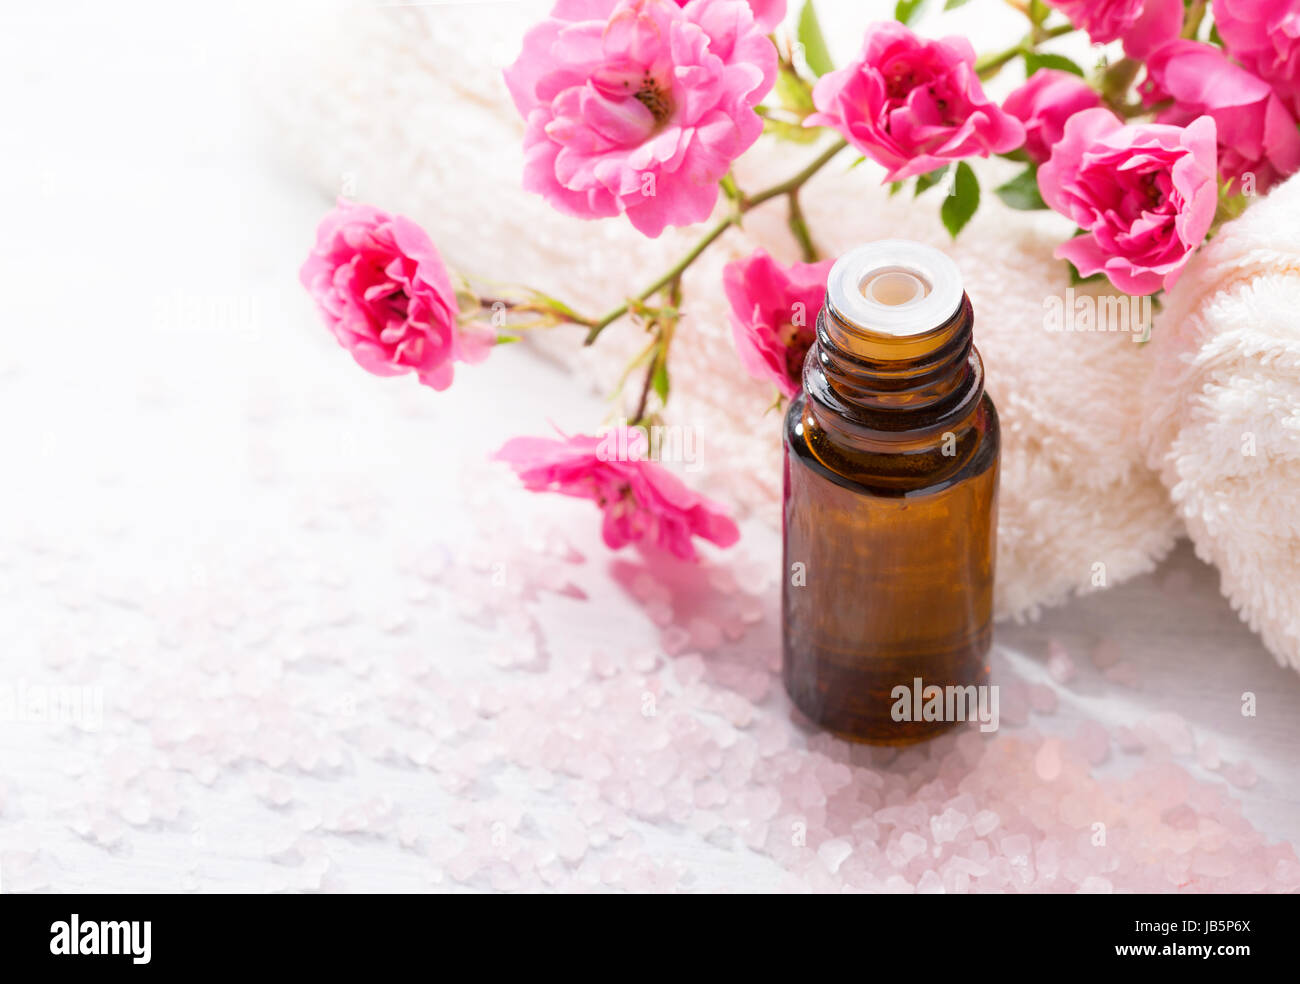 Essential oil, Mineral bath salts,  branch  of  small pink  rose  on the wooden table. Stock Photo